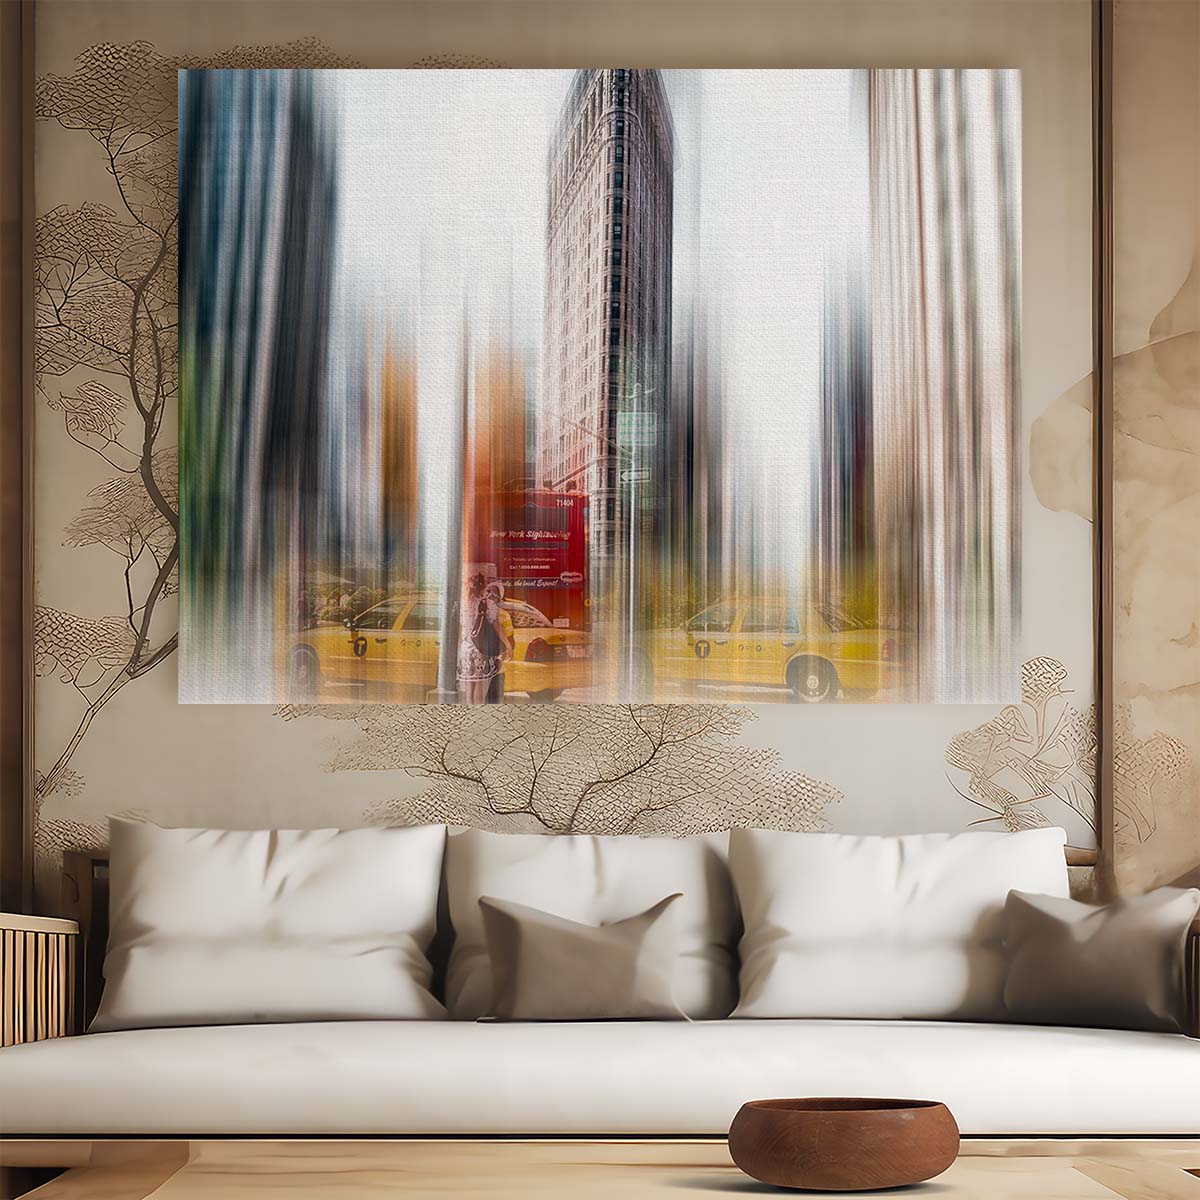 Iconic NYC Flatiron Building Blurry Cityscape Wall Art by Luxuriance Designs. Made in USA.